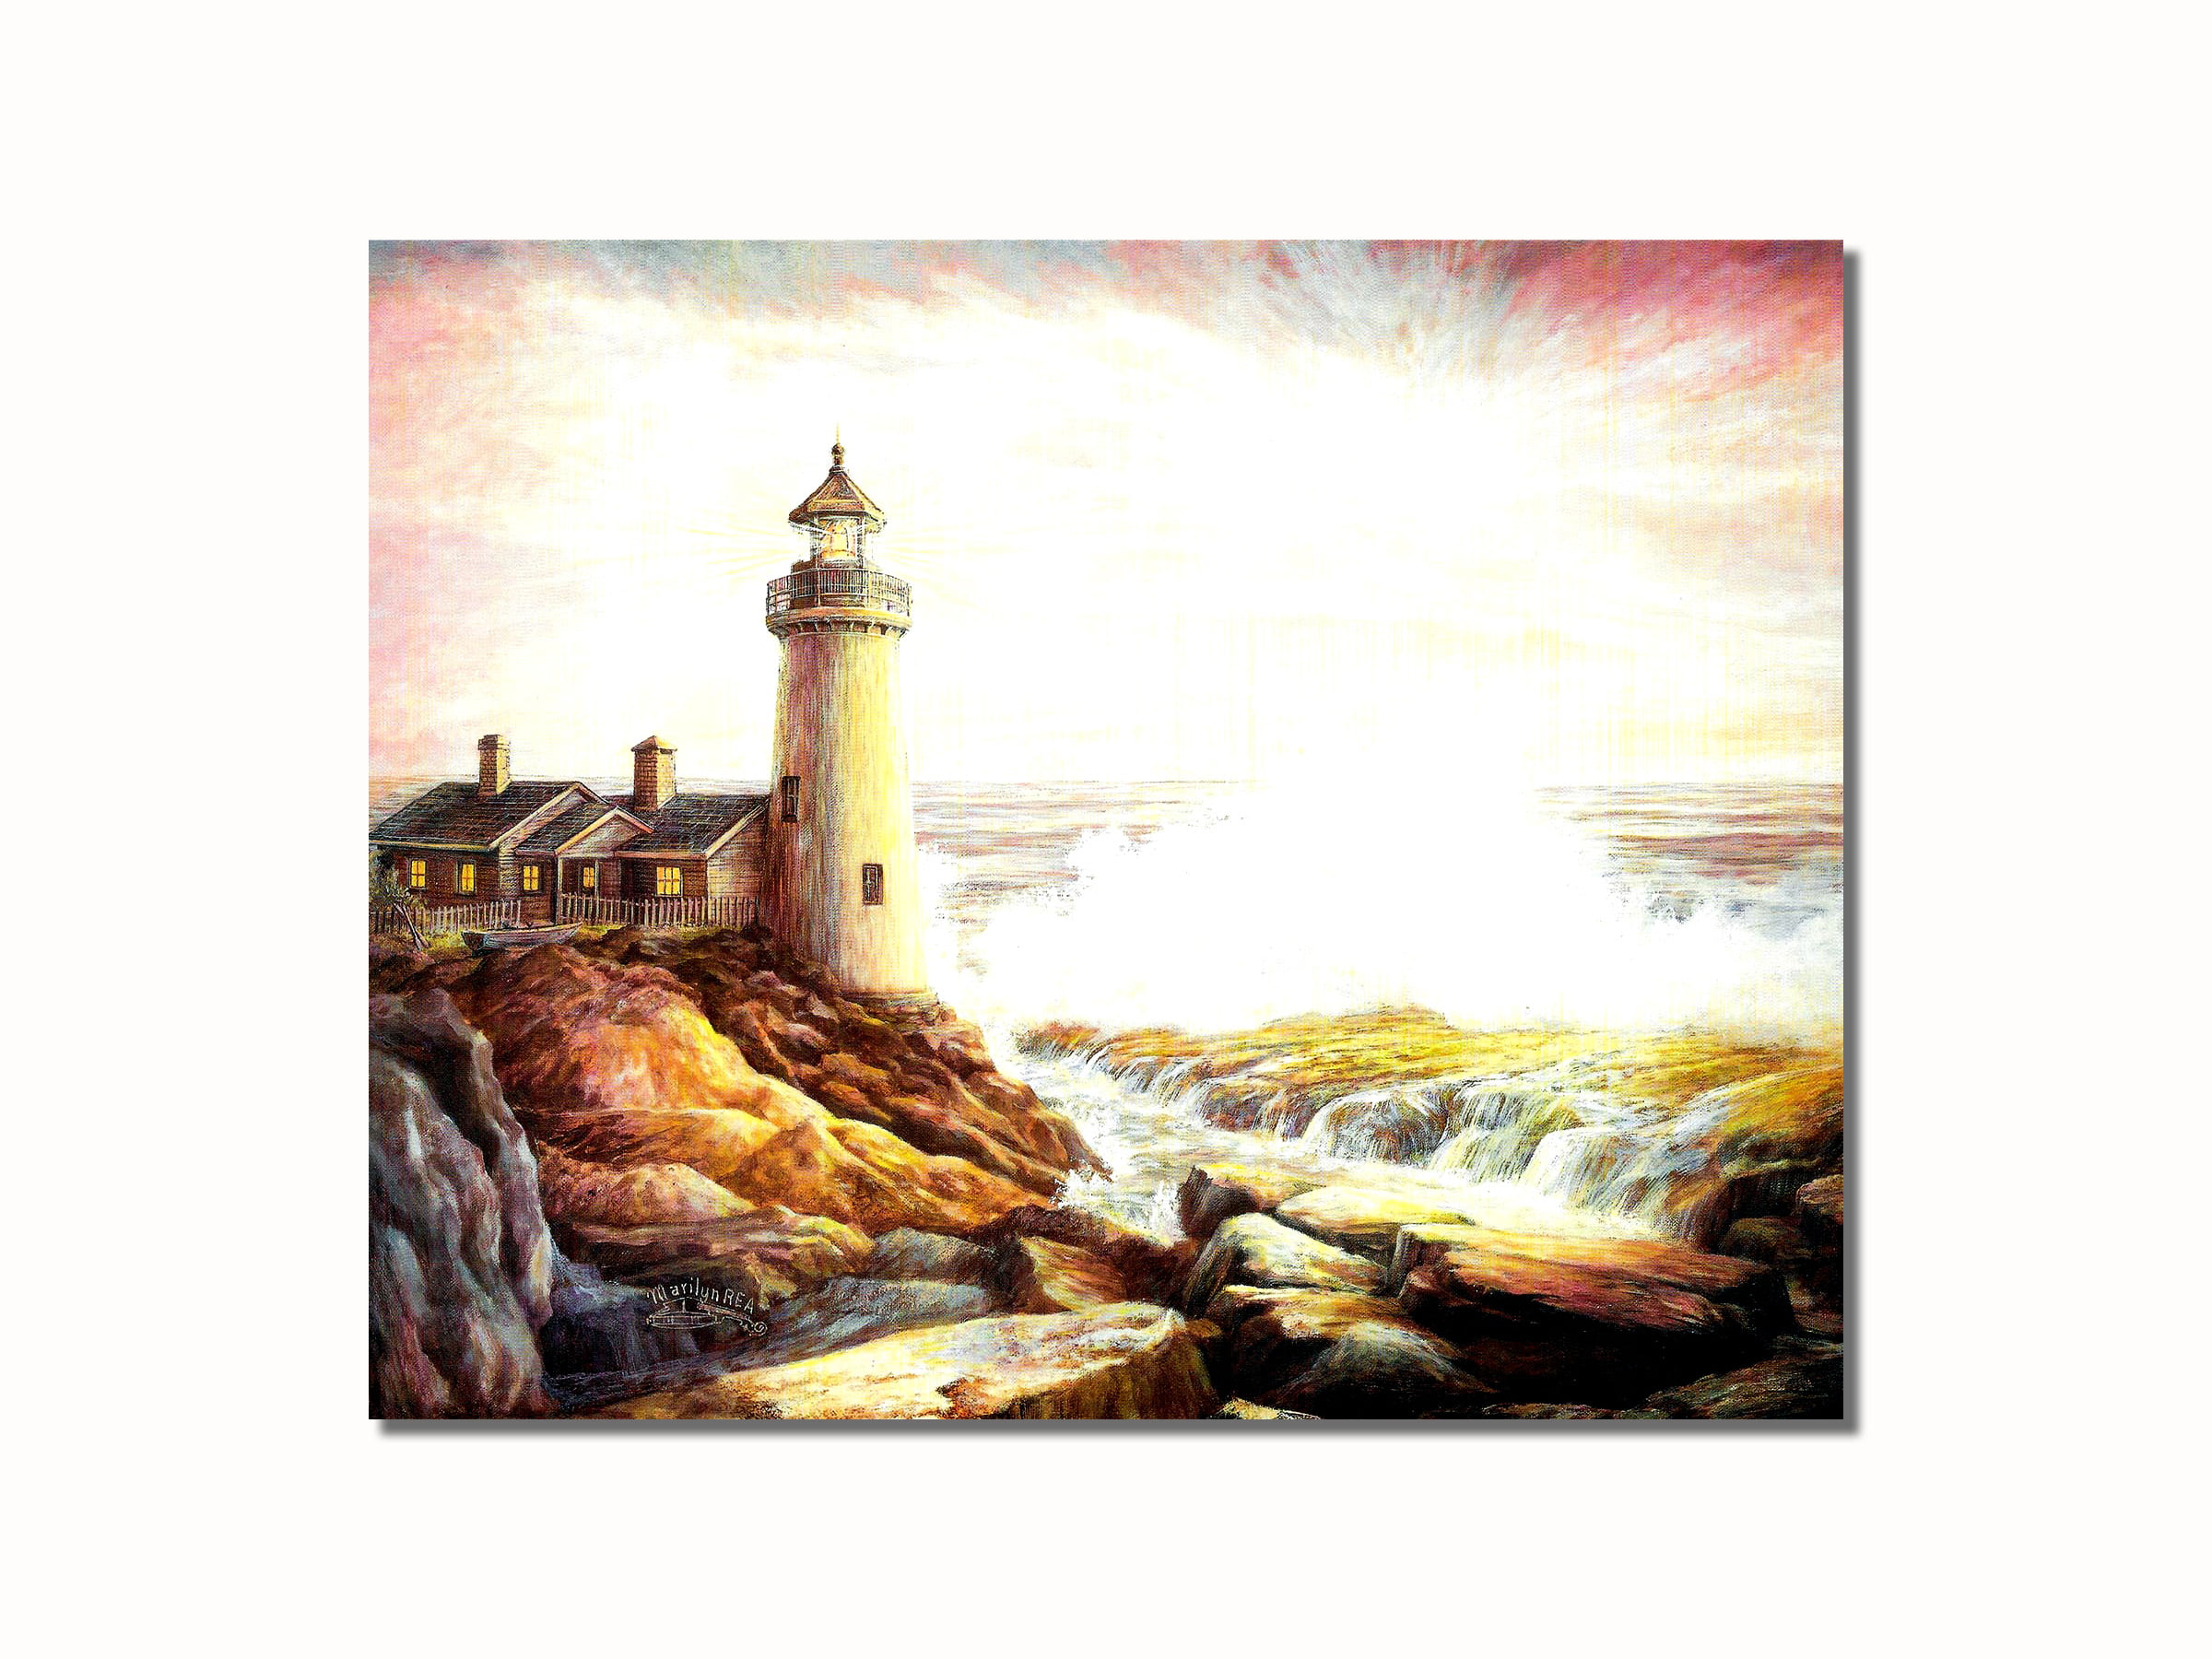 Lighthouse with Victorian Cottage by the Sea #1 Wall Picture 8x10 Art Print 